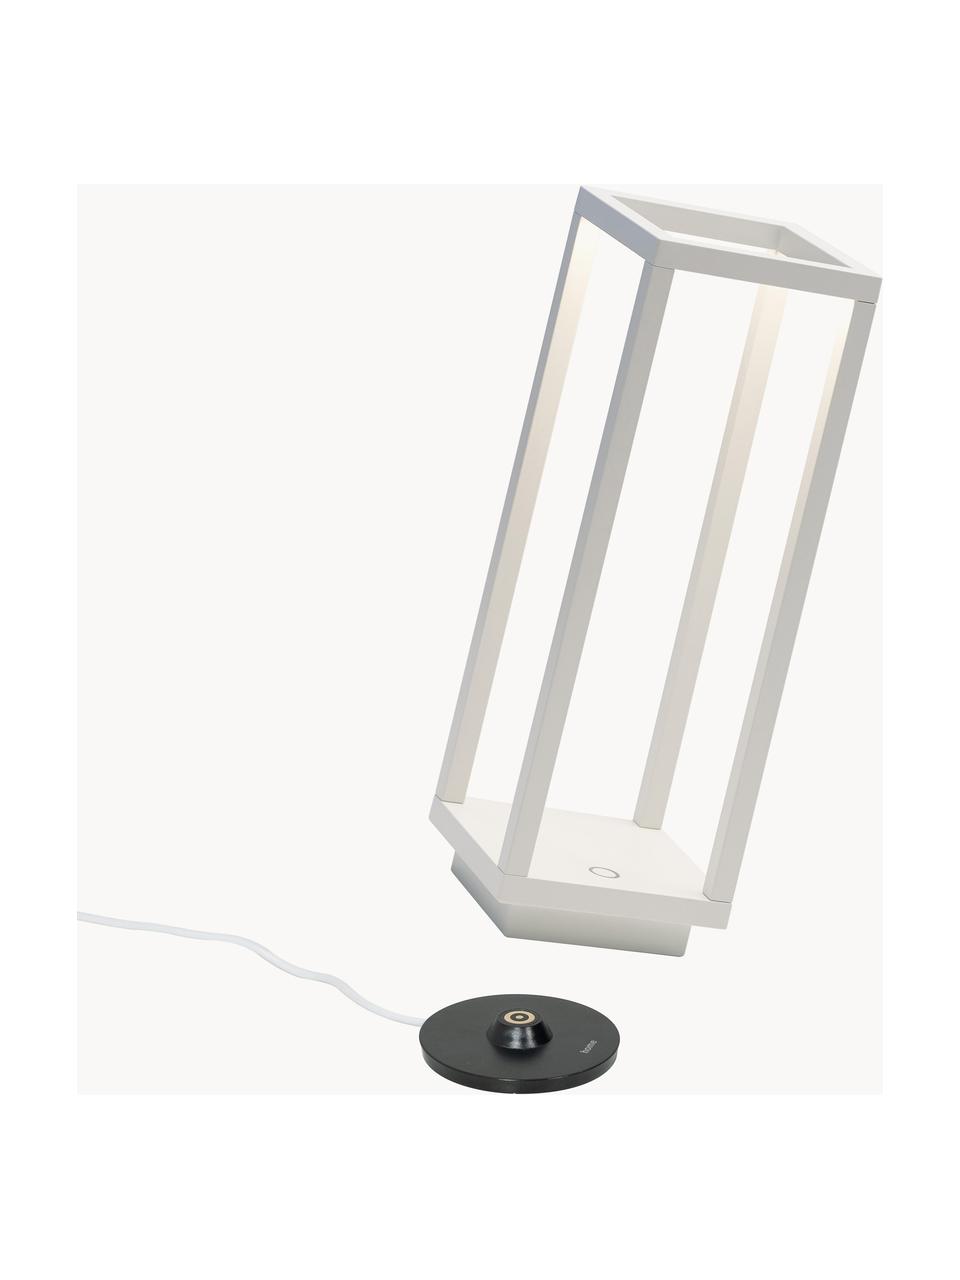 Mobile Dimmbare LED-Tischlampe Home Pro, Weiss, B 10 x H 29 cm